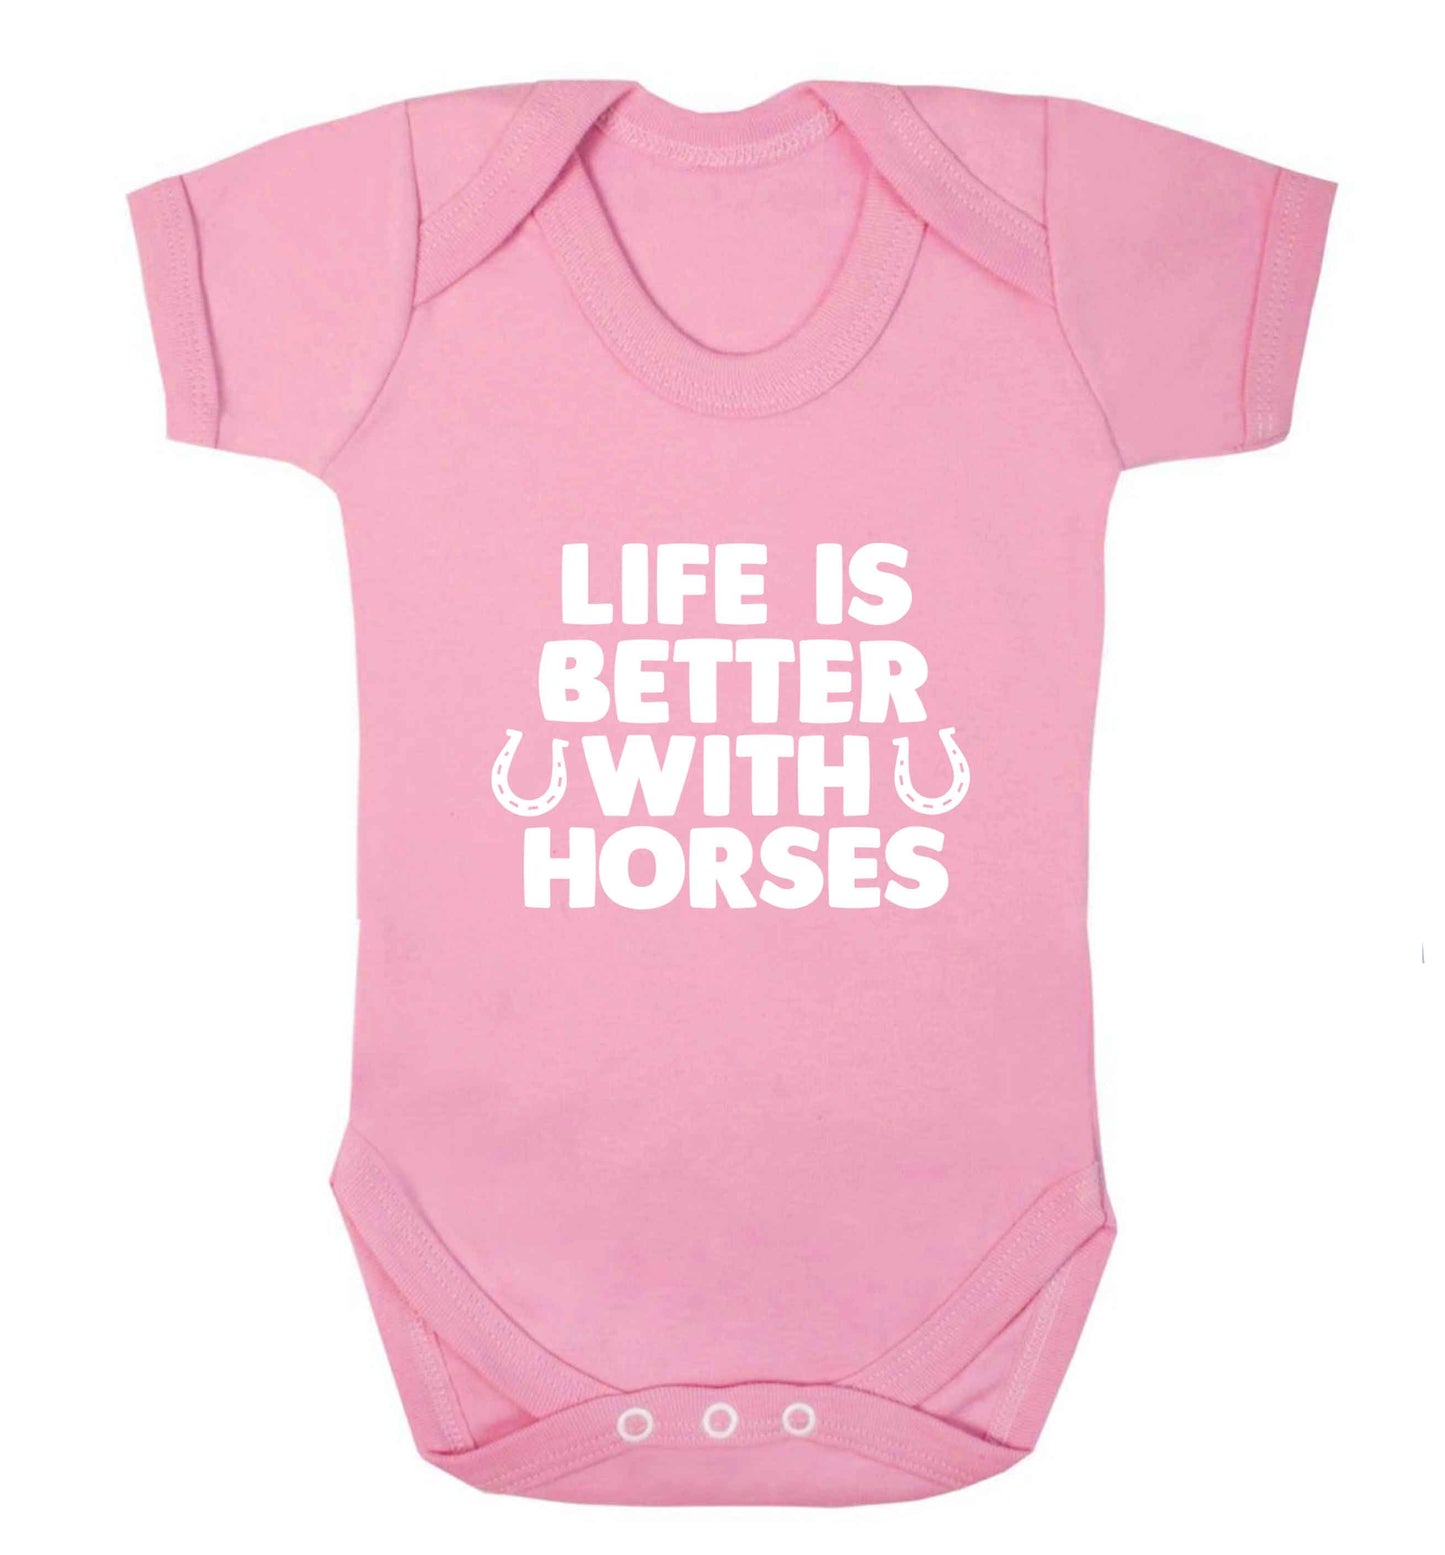 Life is better with horses baby vest pale pink 18-24 months